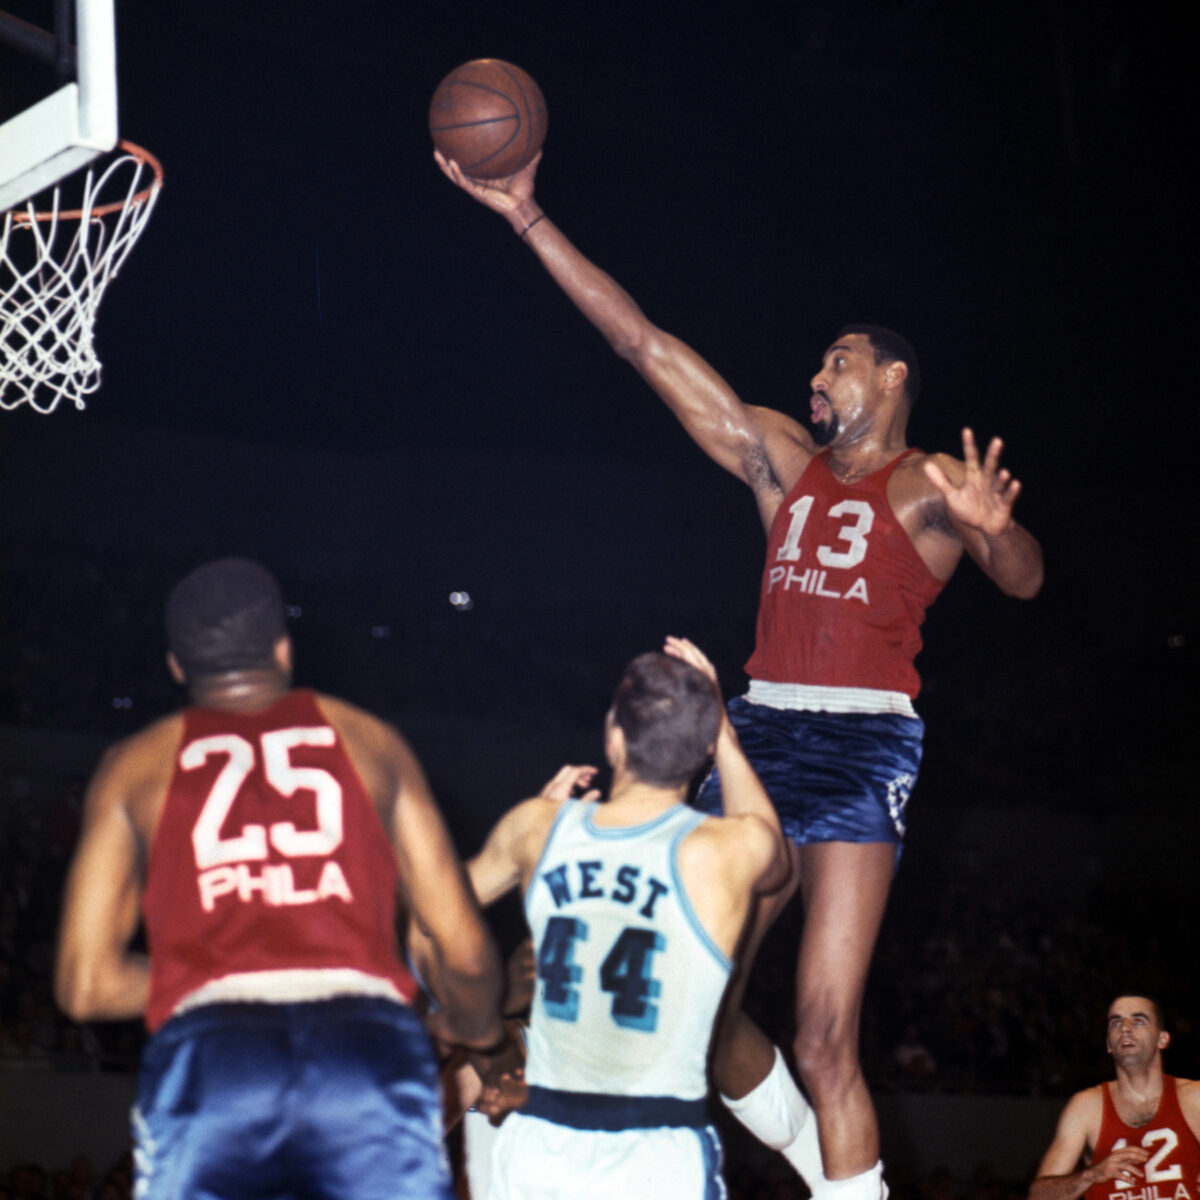 Sixers legend Wilt Chamberlain ranked 3rd-best center in NBA history